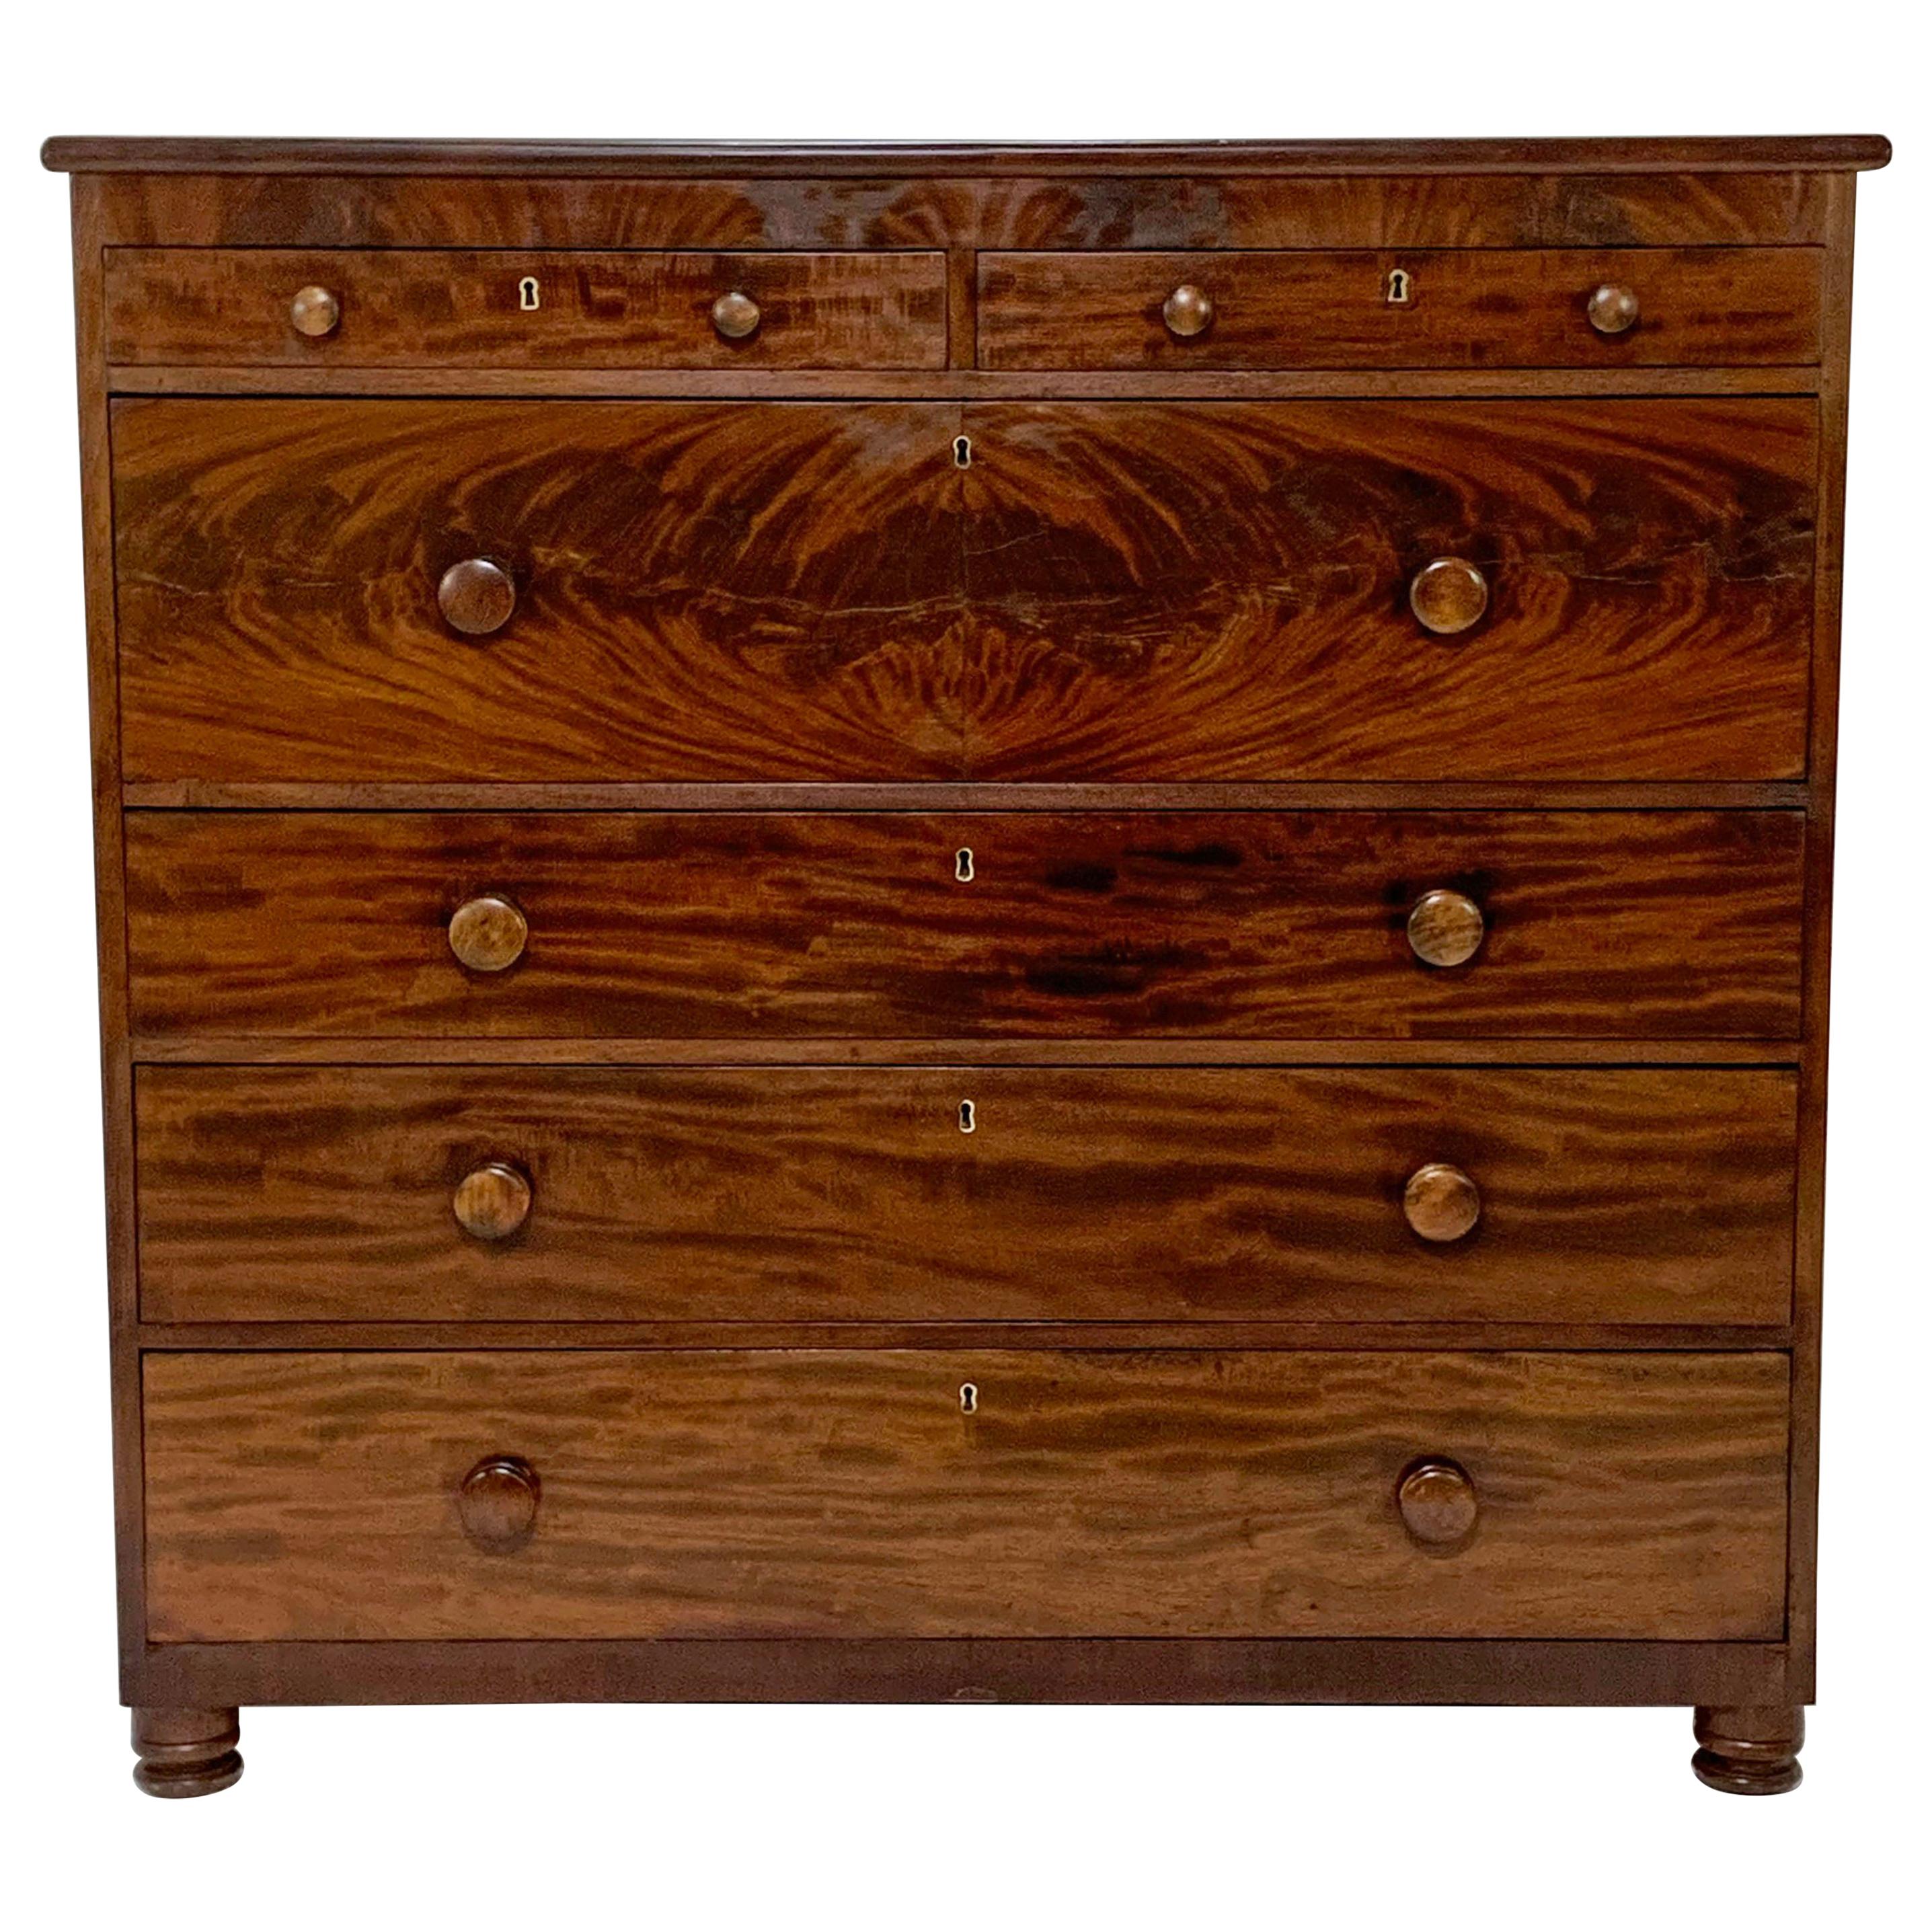 Early 19th Century Antique American Mahogany Dressing Chest